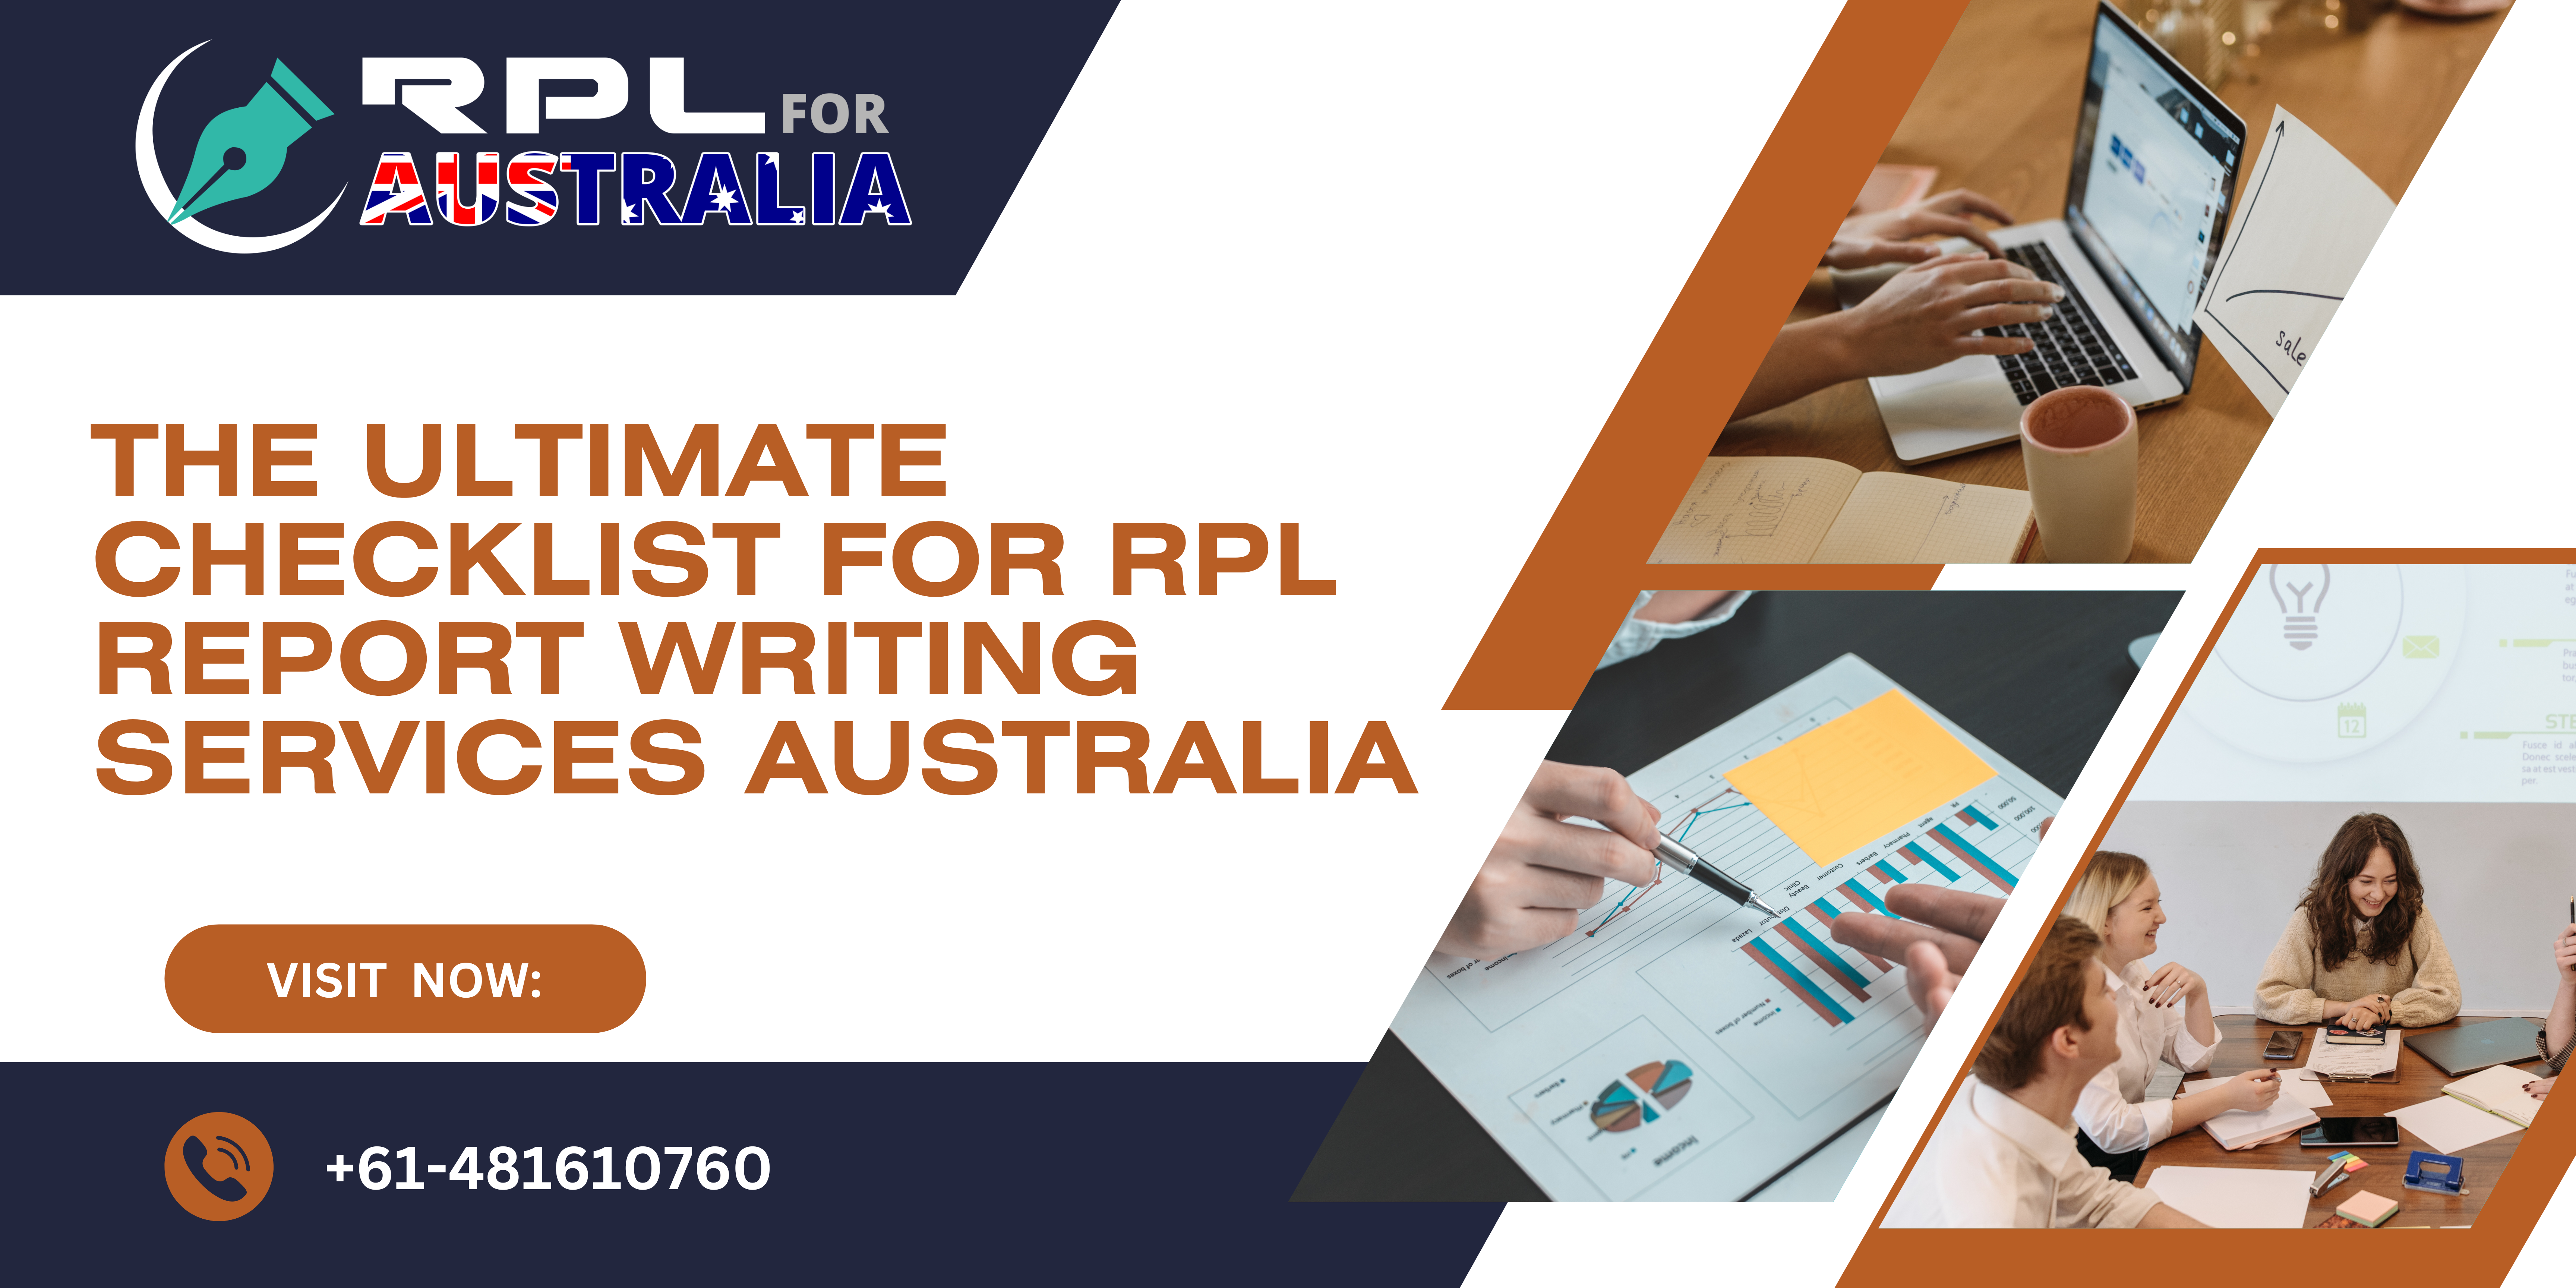 The Ultimate Checklist for RPL Report Writing Services Australia